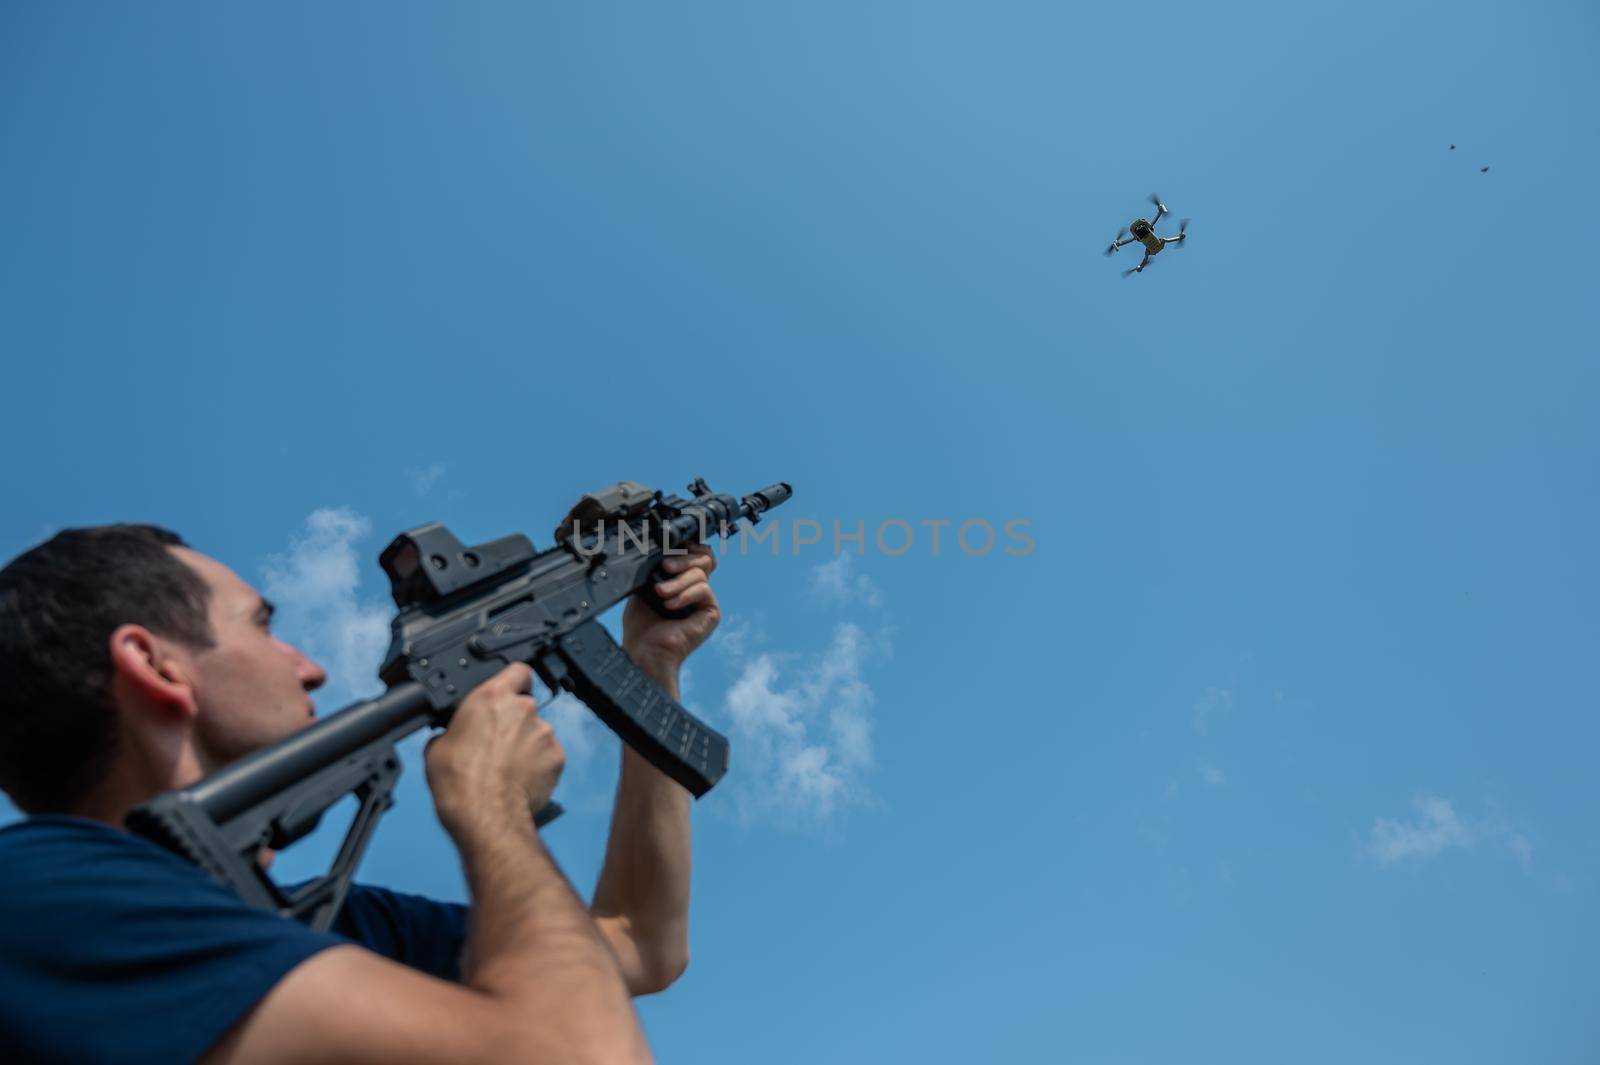 Caucasian man shoots a flying drone with a rifle. by mrwed54